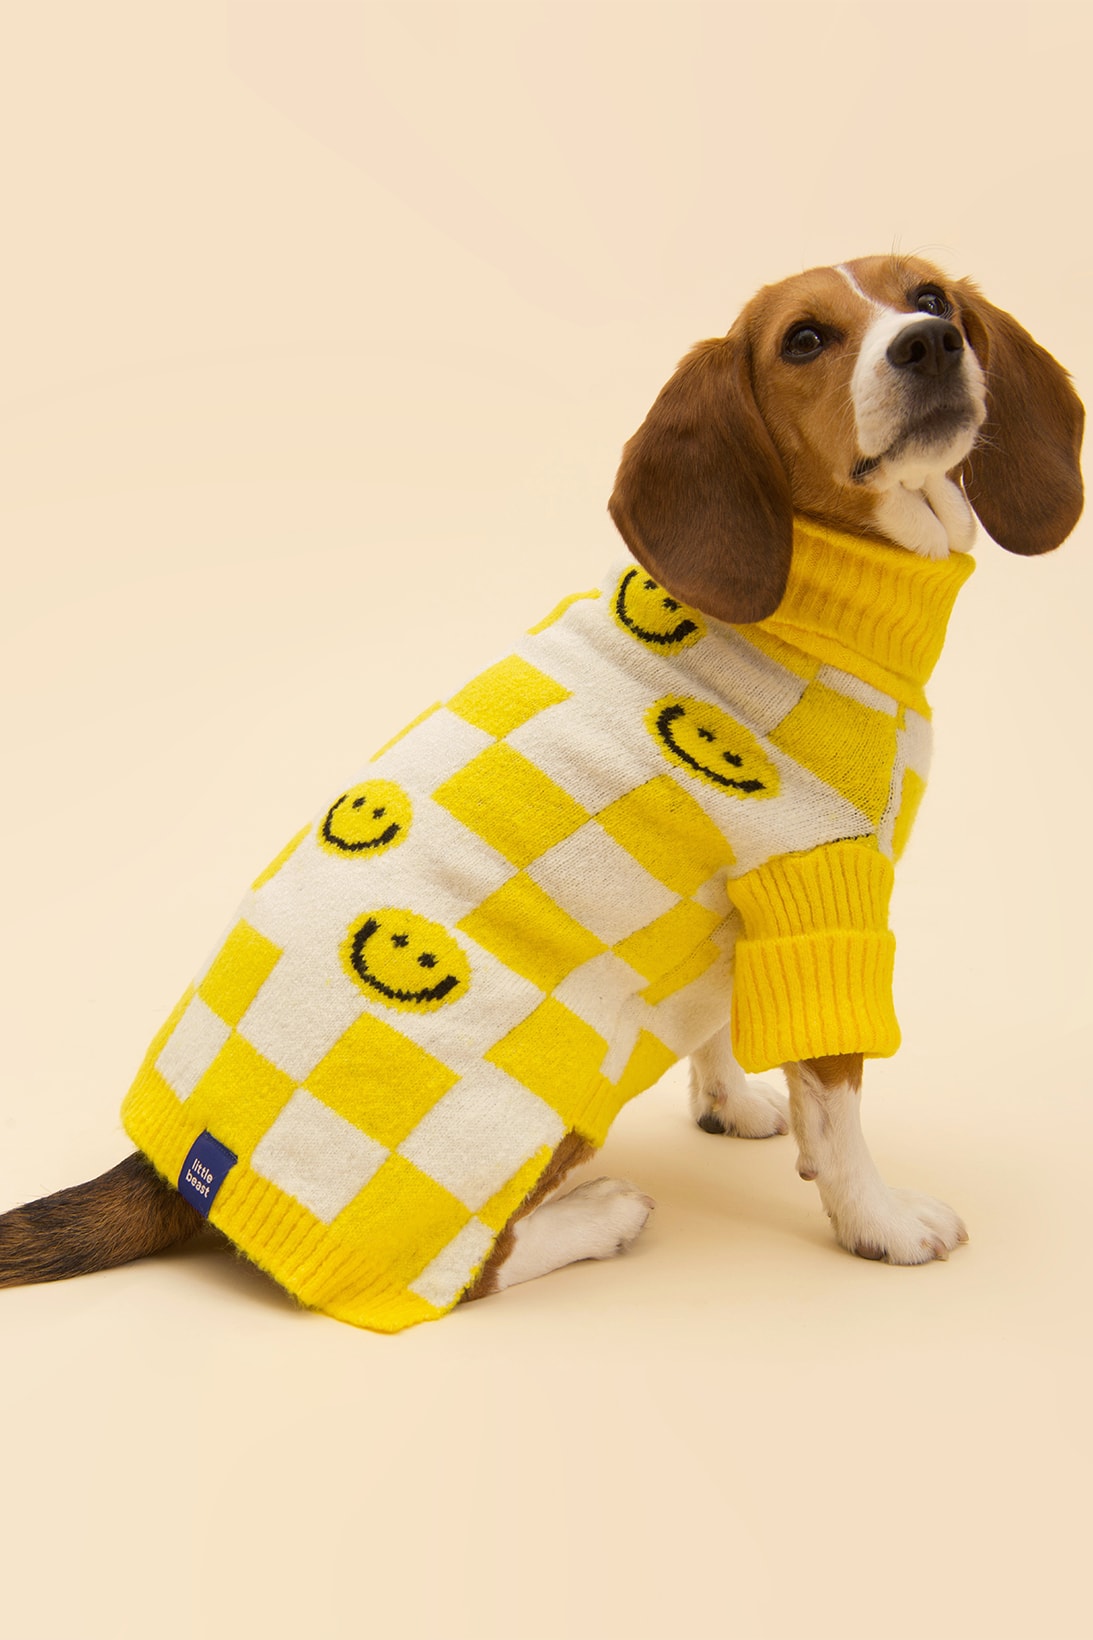 Little Beast New Winter Collection Dogs Lookbook Sweaters Socks The Smiley Sweater